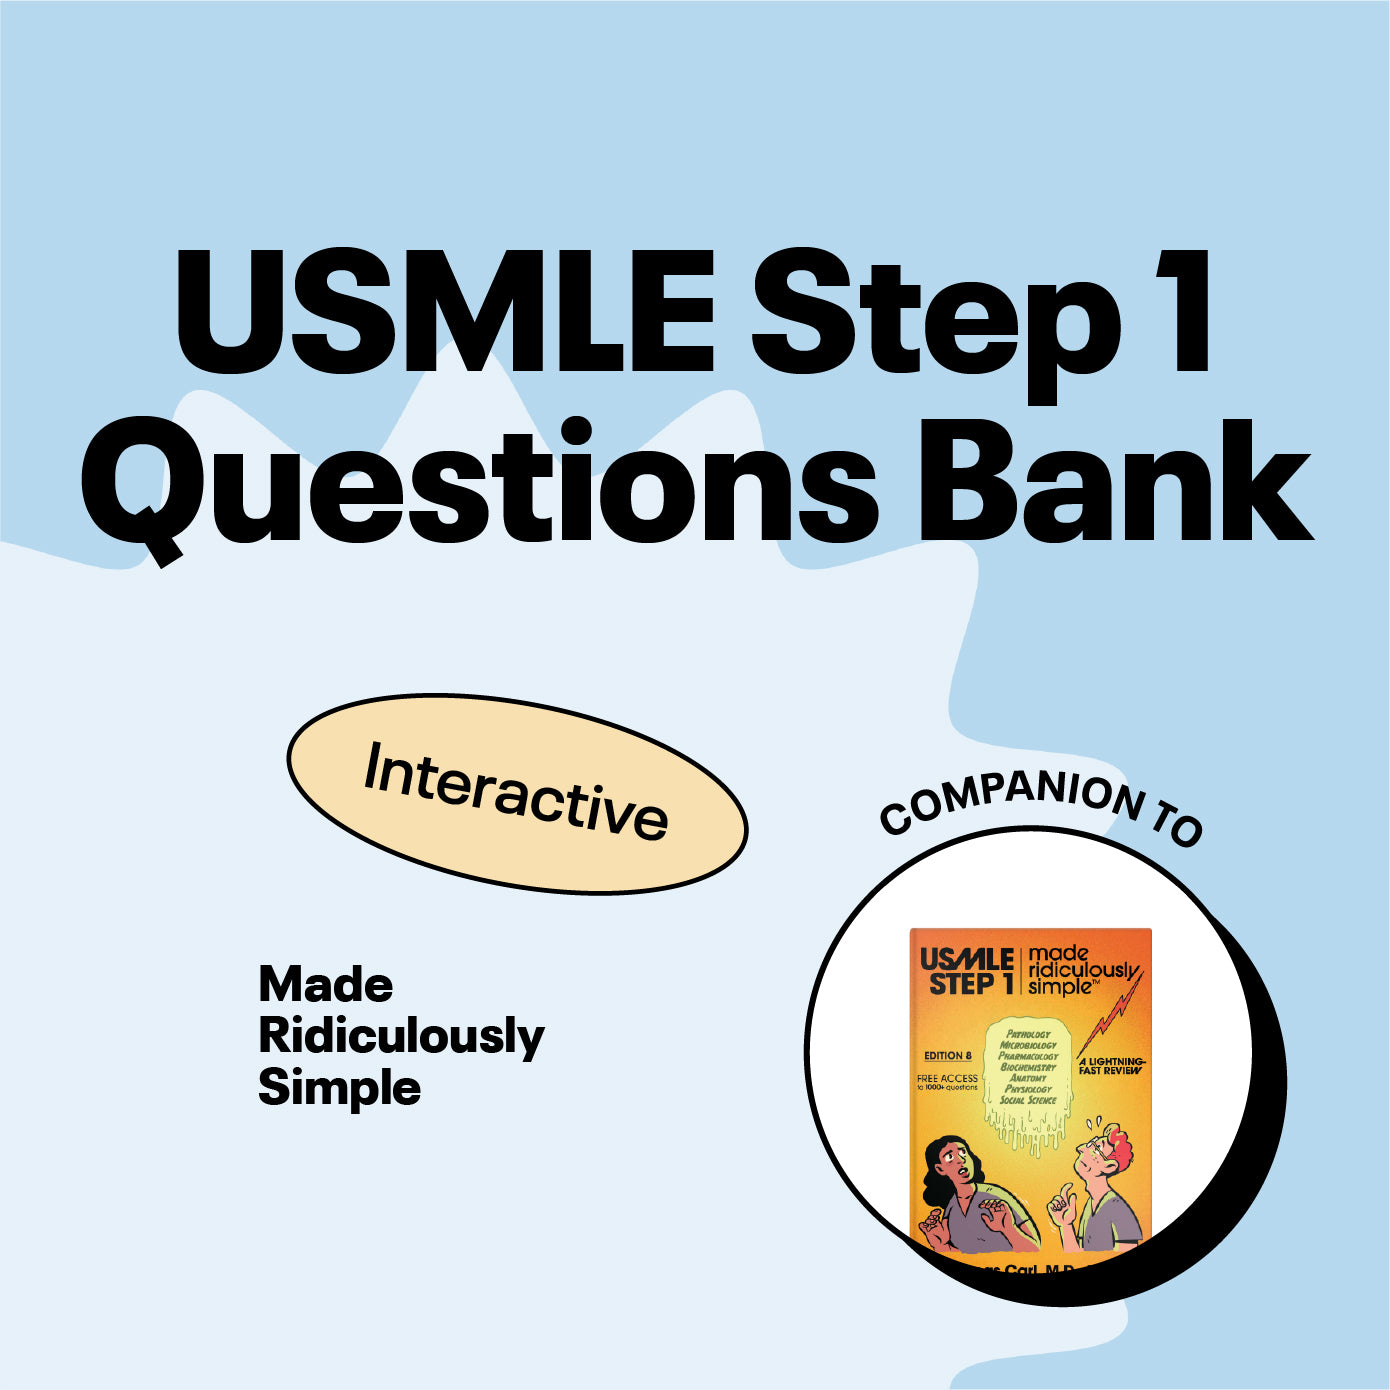 USMLE Step 1 Made Ridiculously Simple Questions